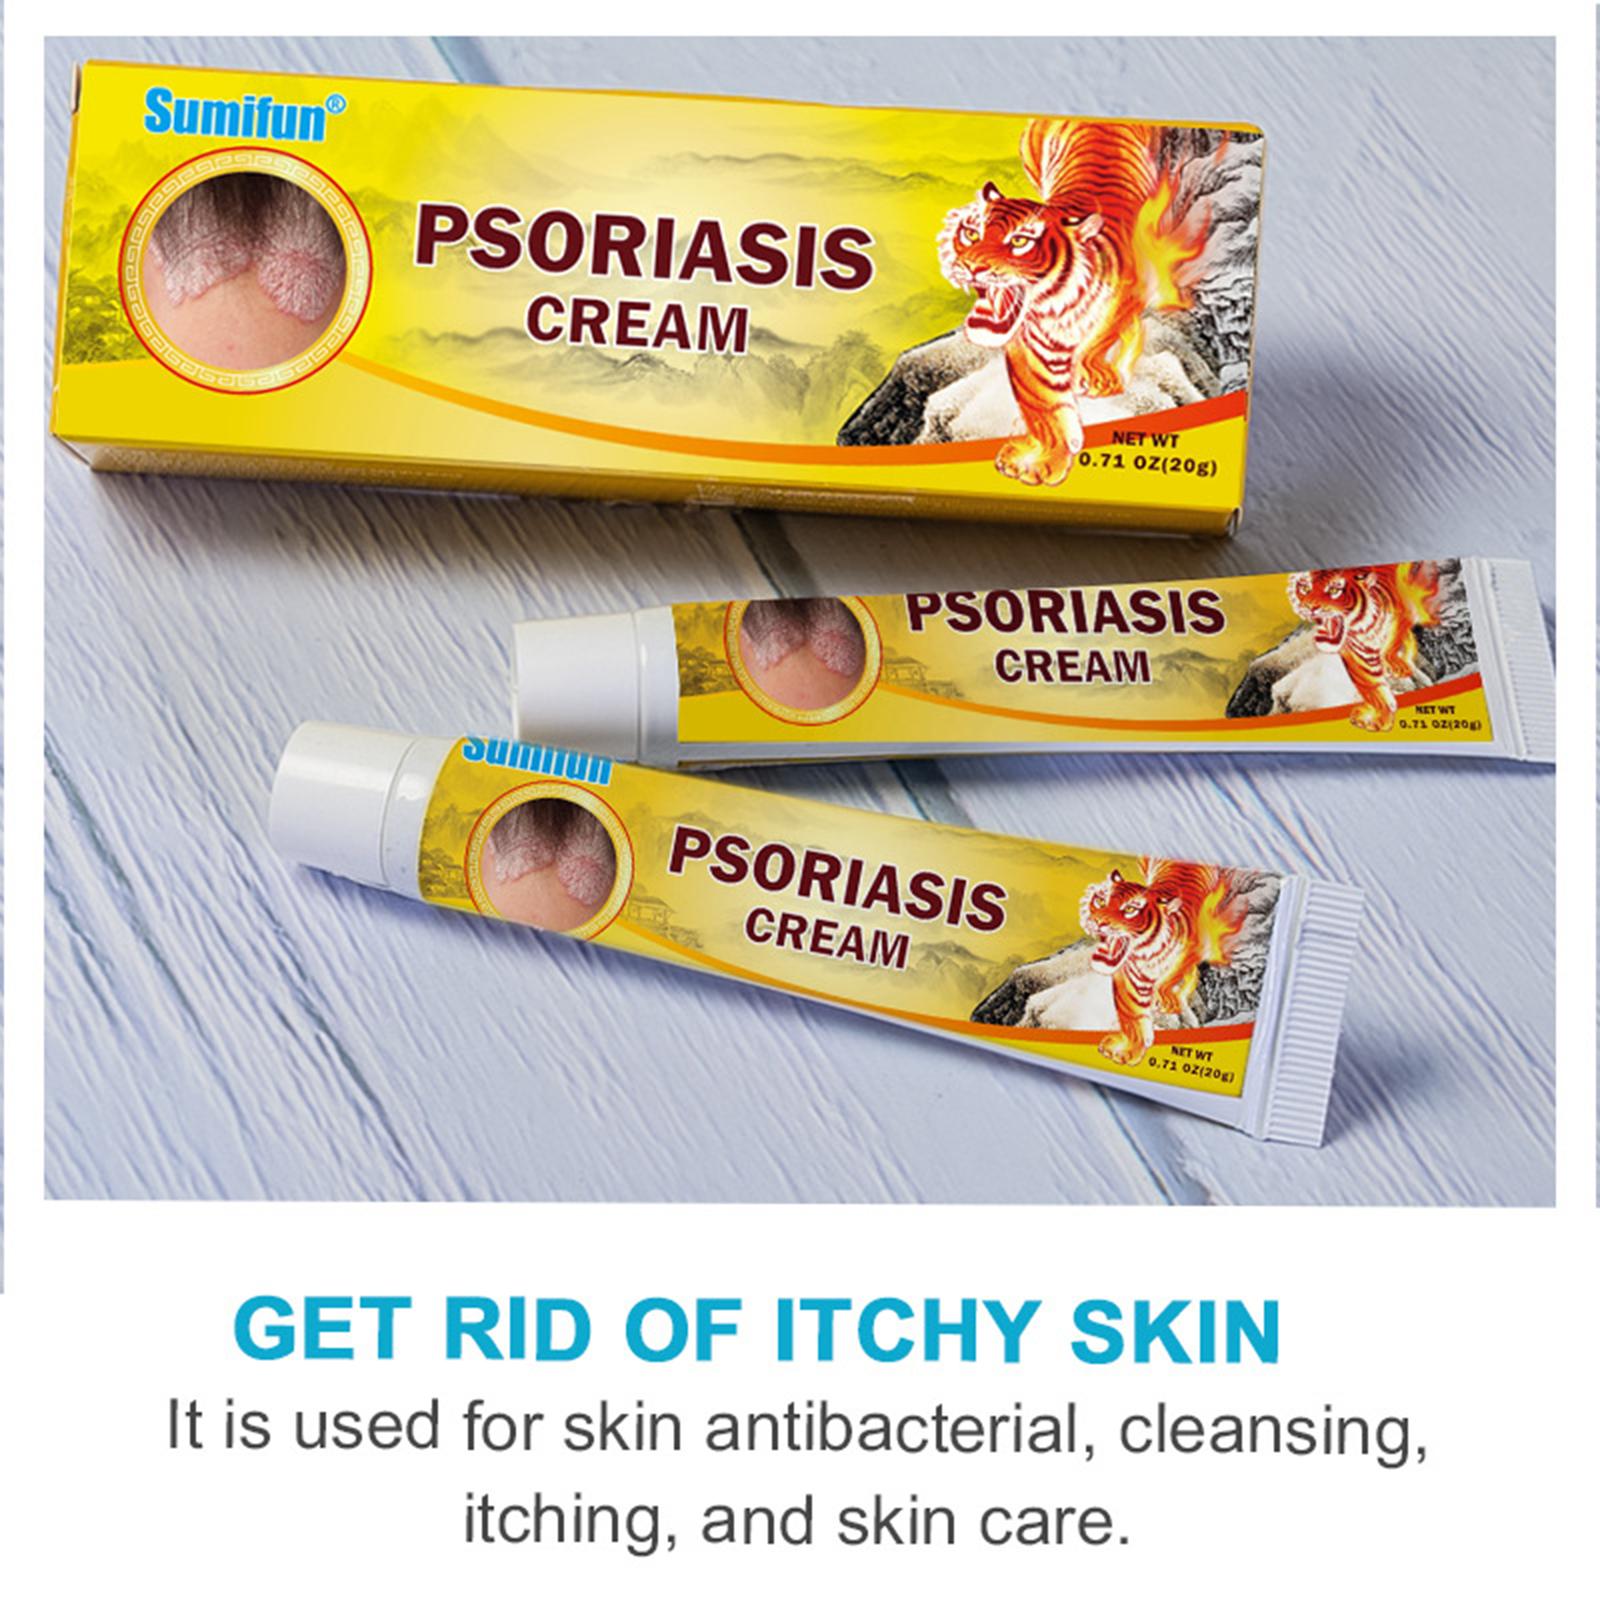 Topical skin ointment